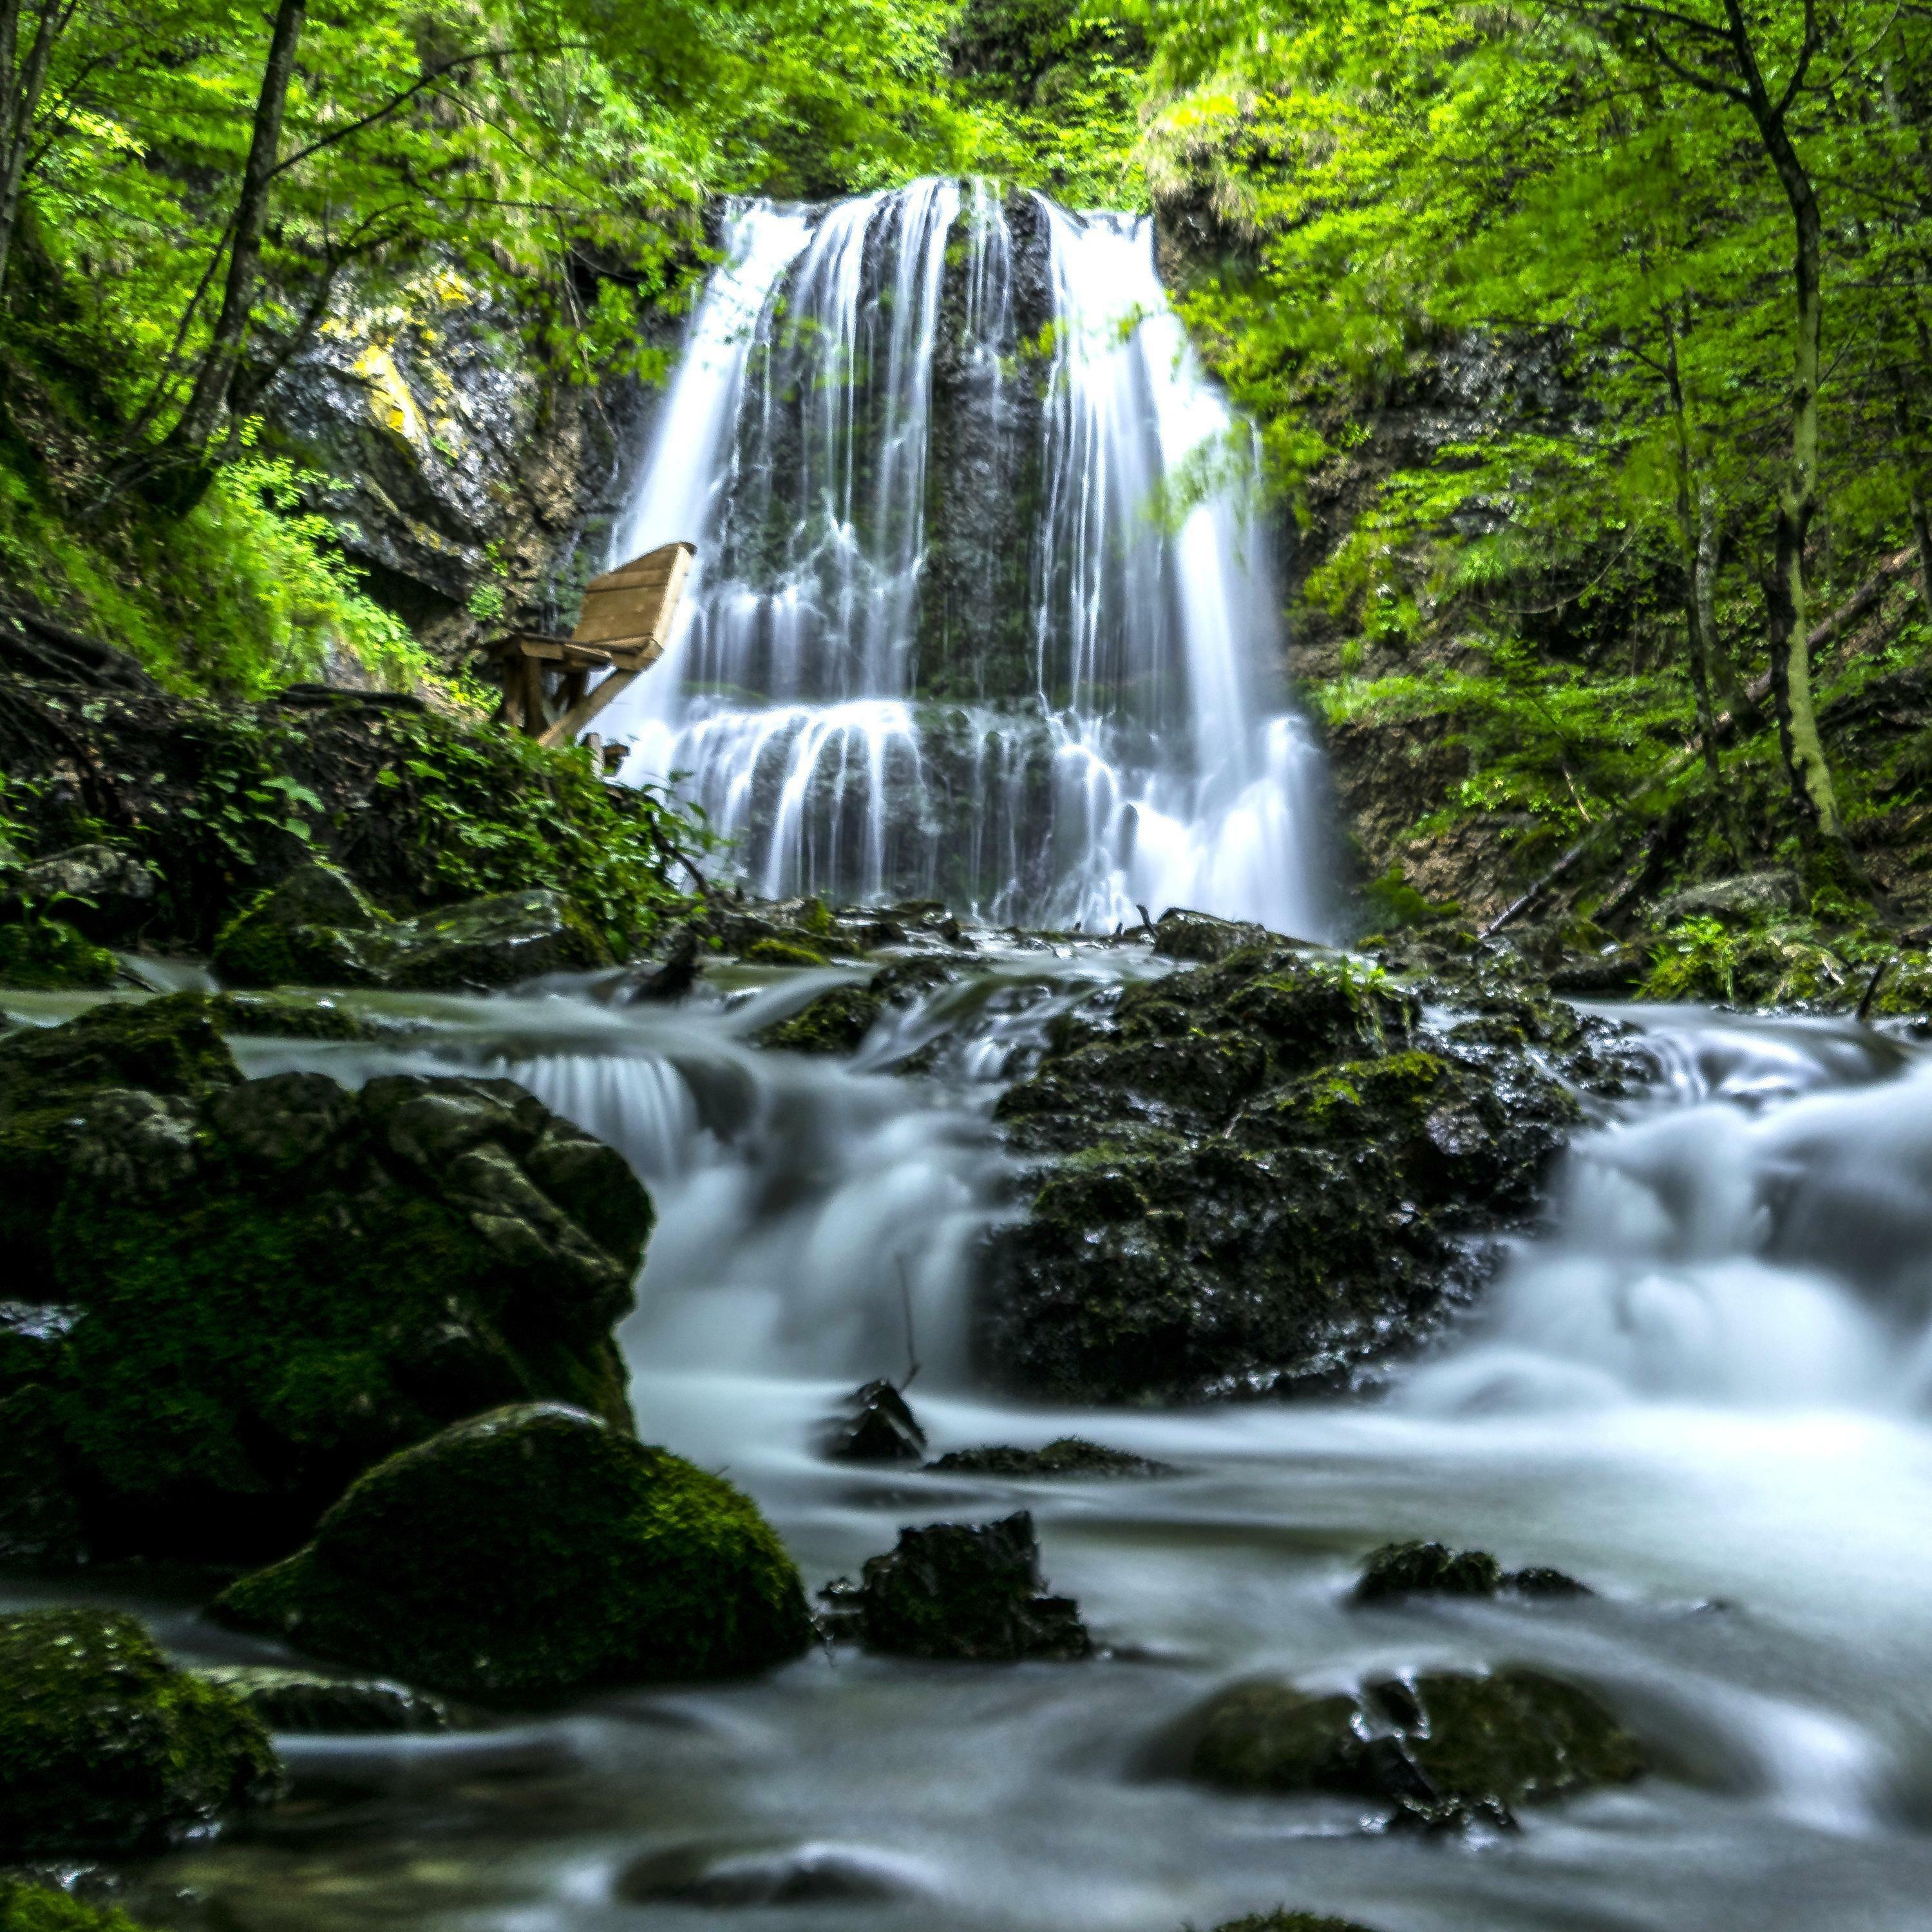 Soothing Sounds - Waterfall Relaxing Music With Nature Sounds | iHeartRadio